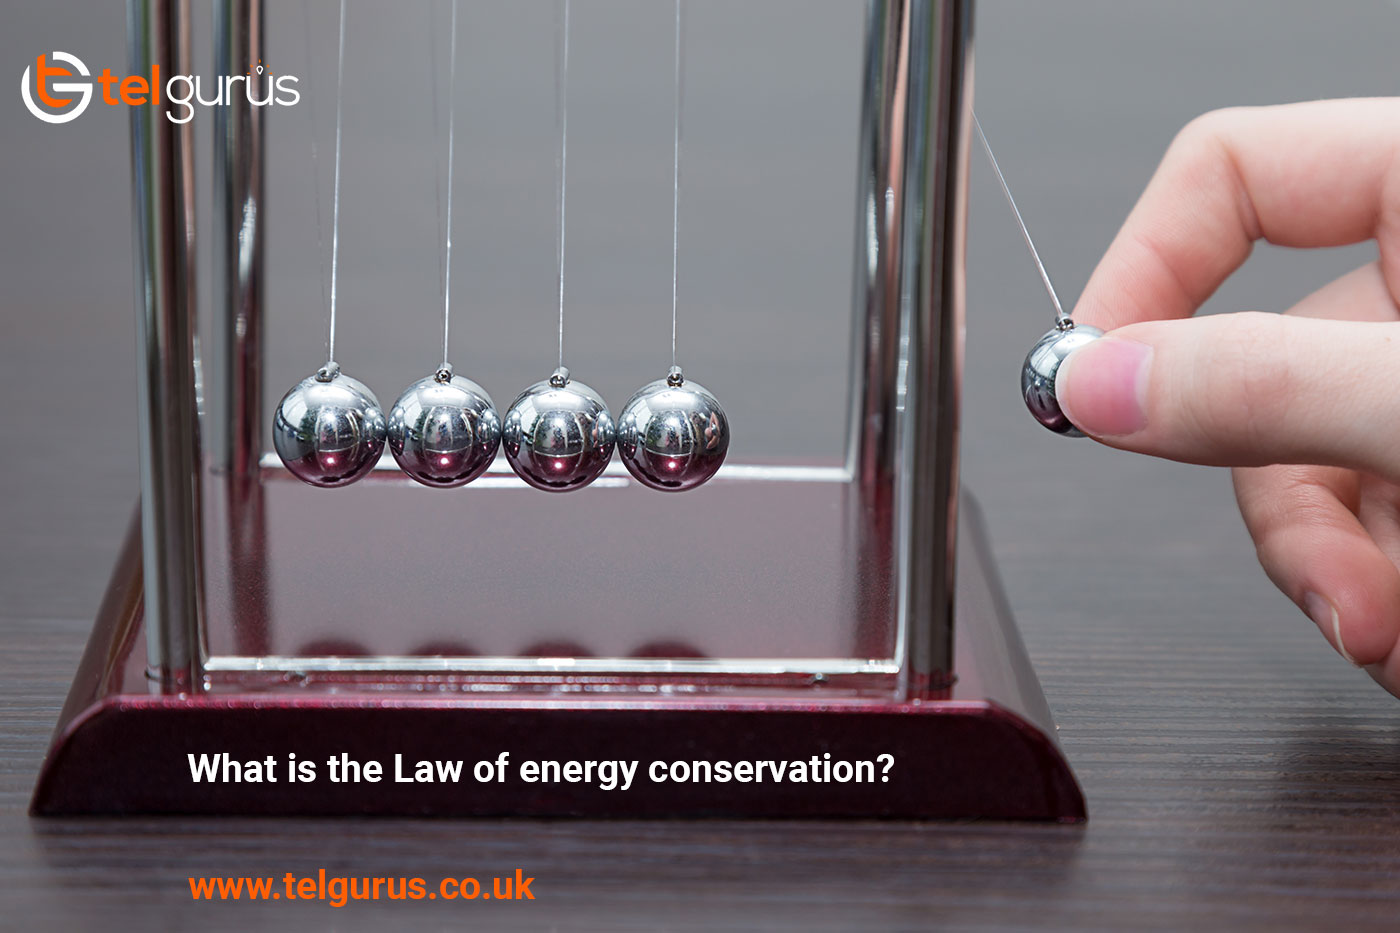 What is the Law of energy conservation?